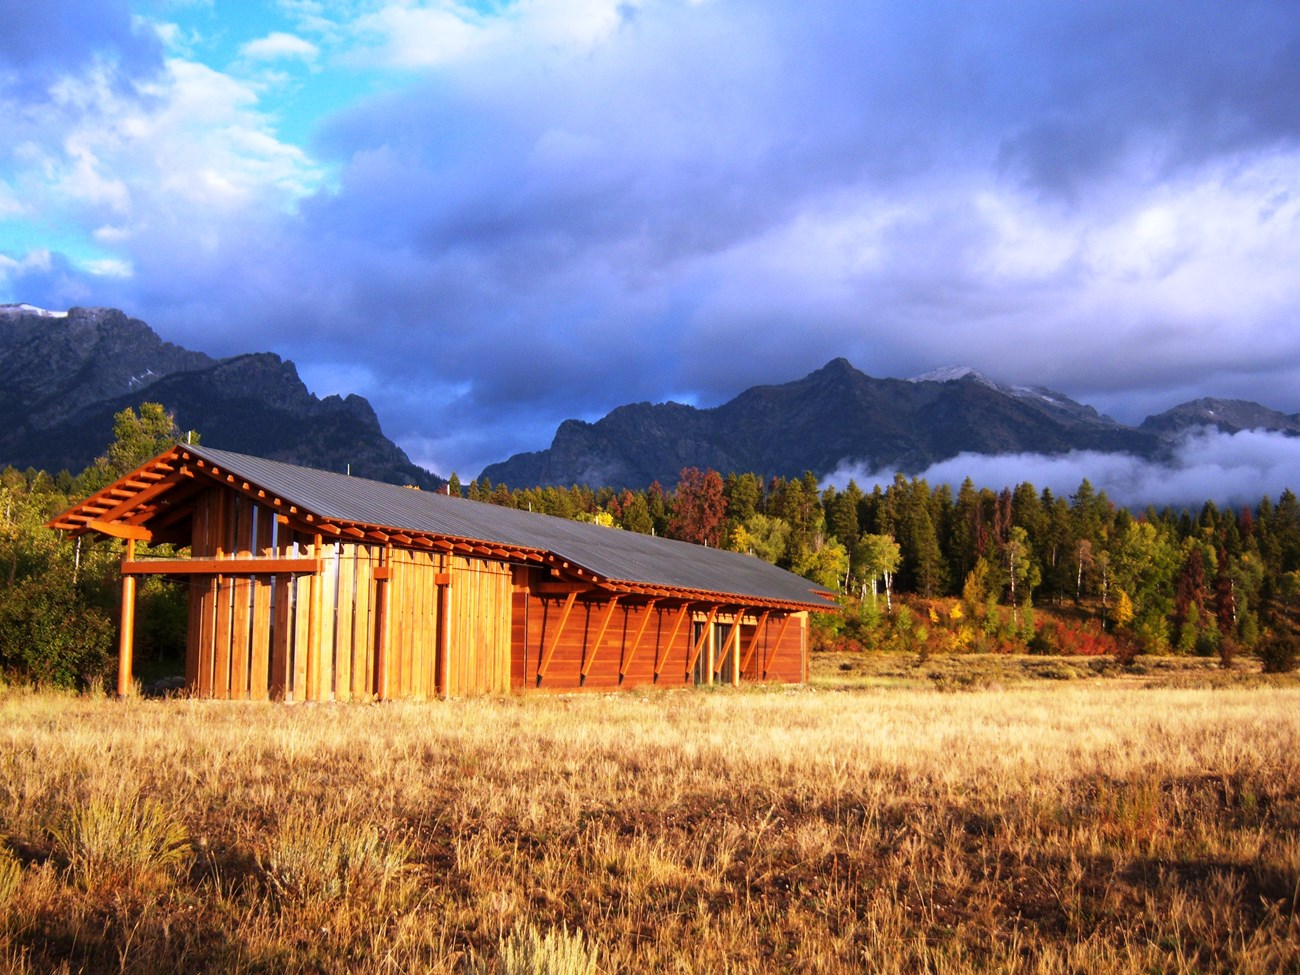 A wood building with mountains in the background.